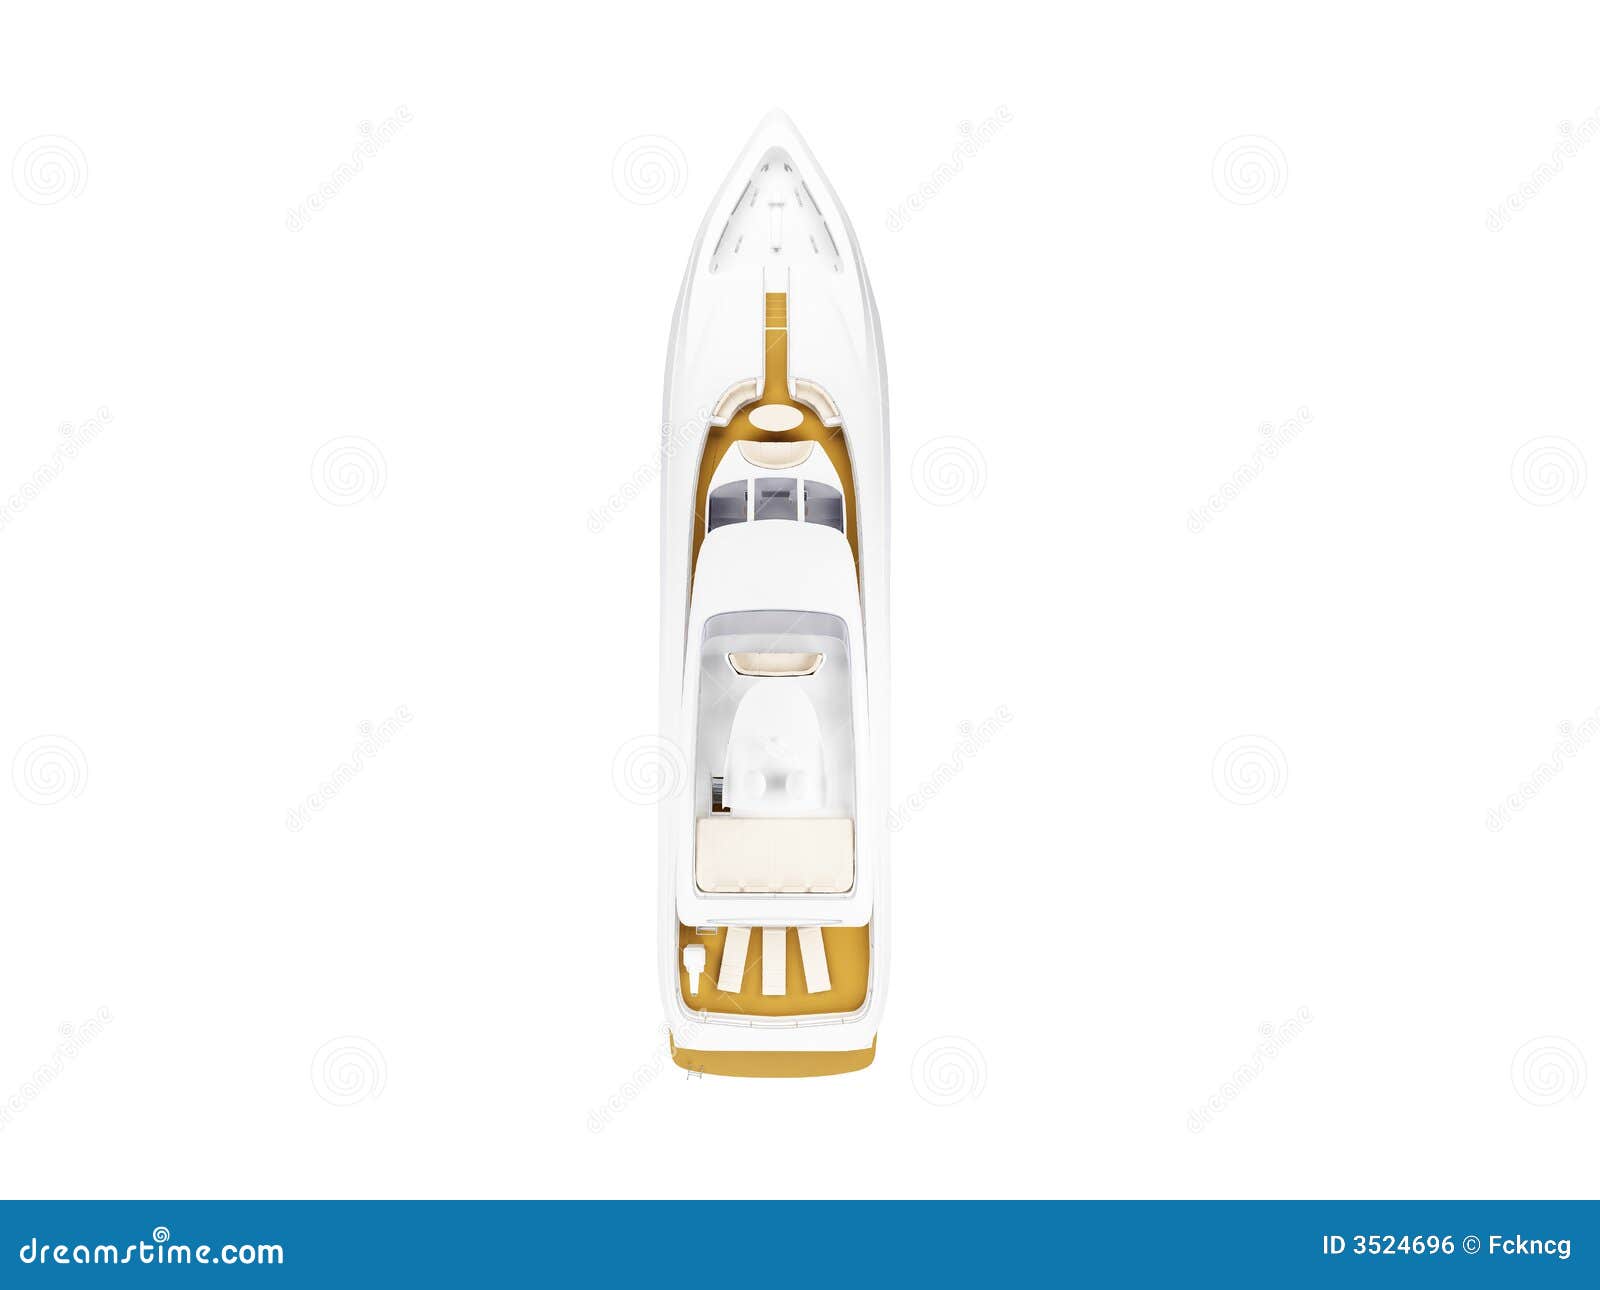 Big Yacht Isolated Top View Royalty Free Stock Image ...